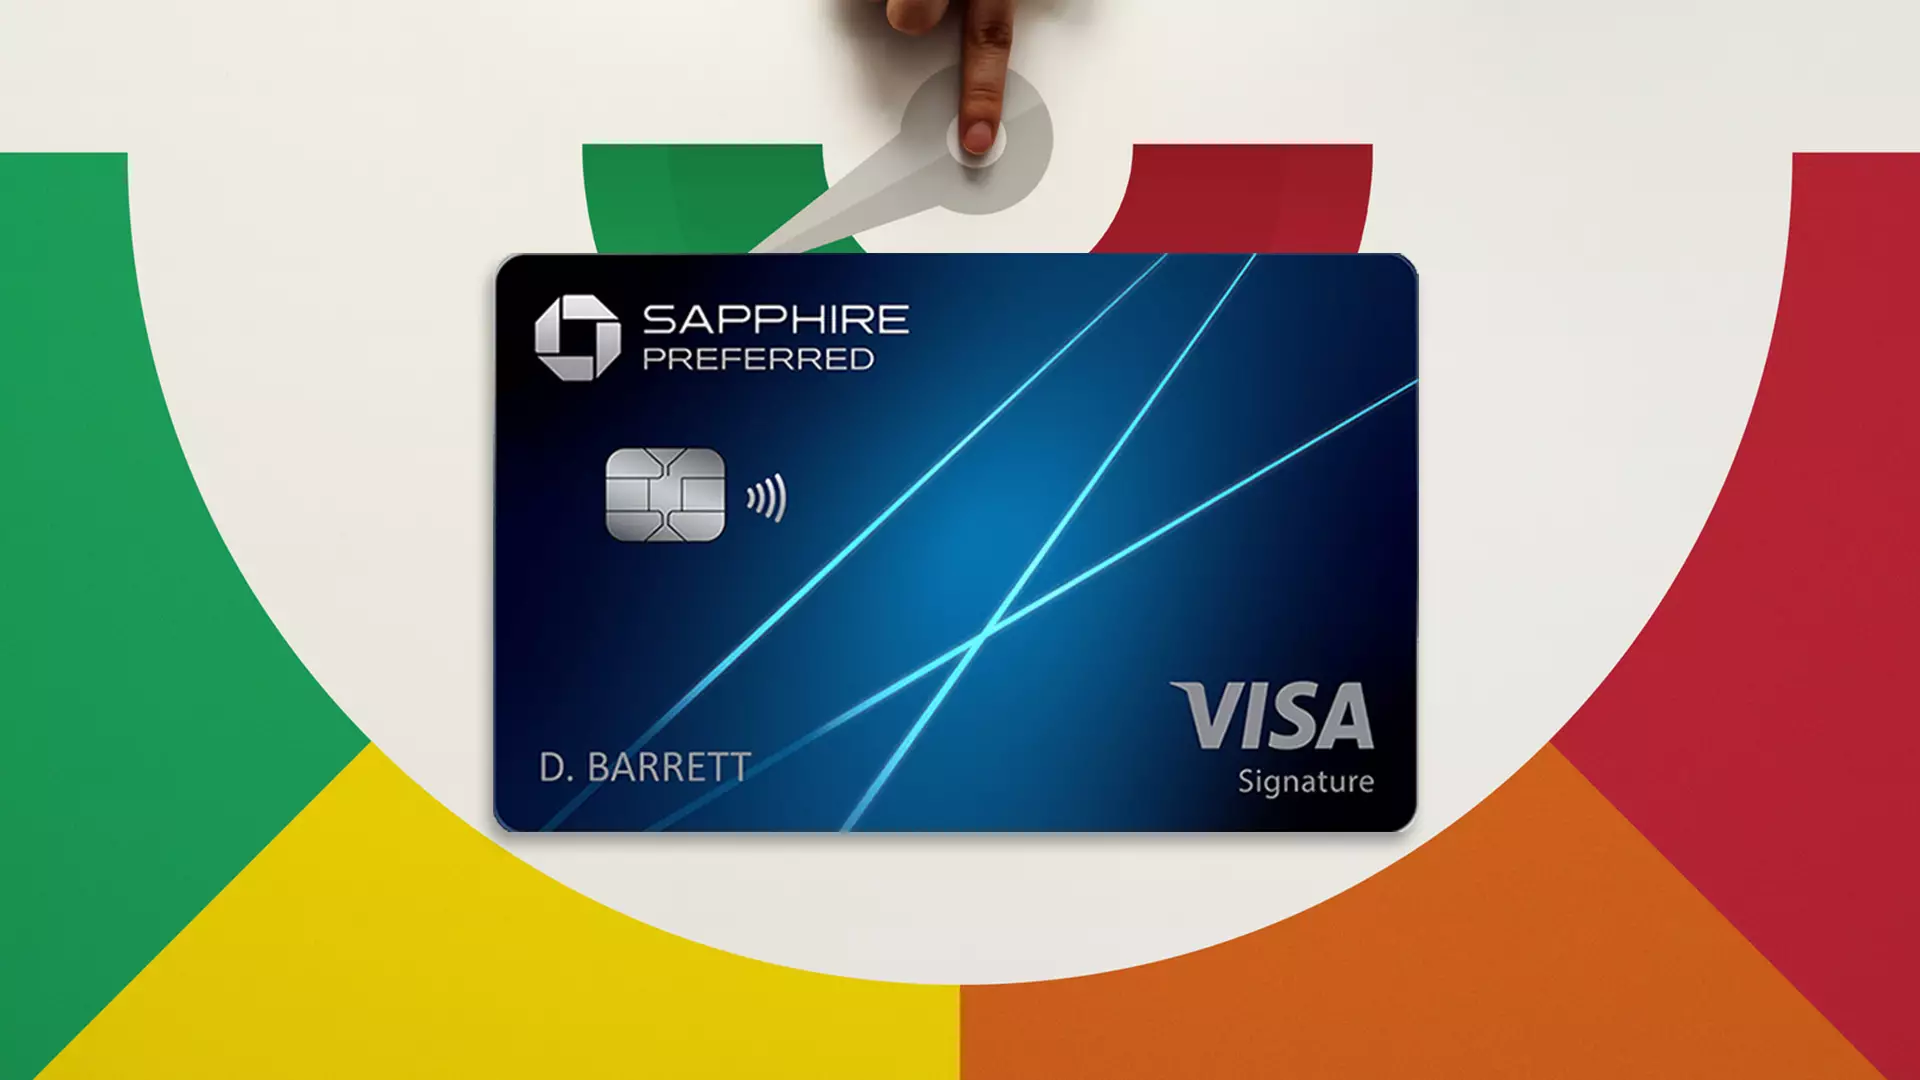 Chase Sapphire Preferred Card